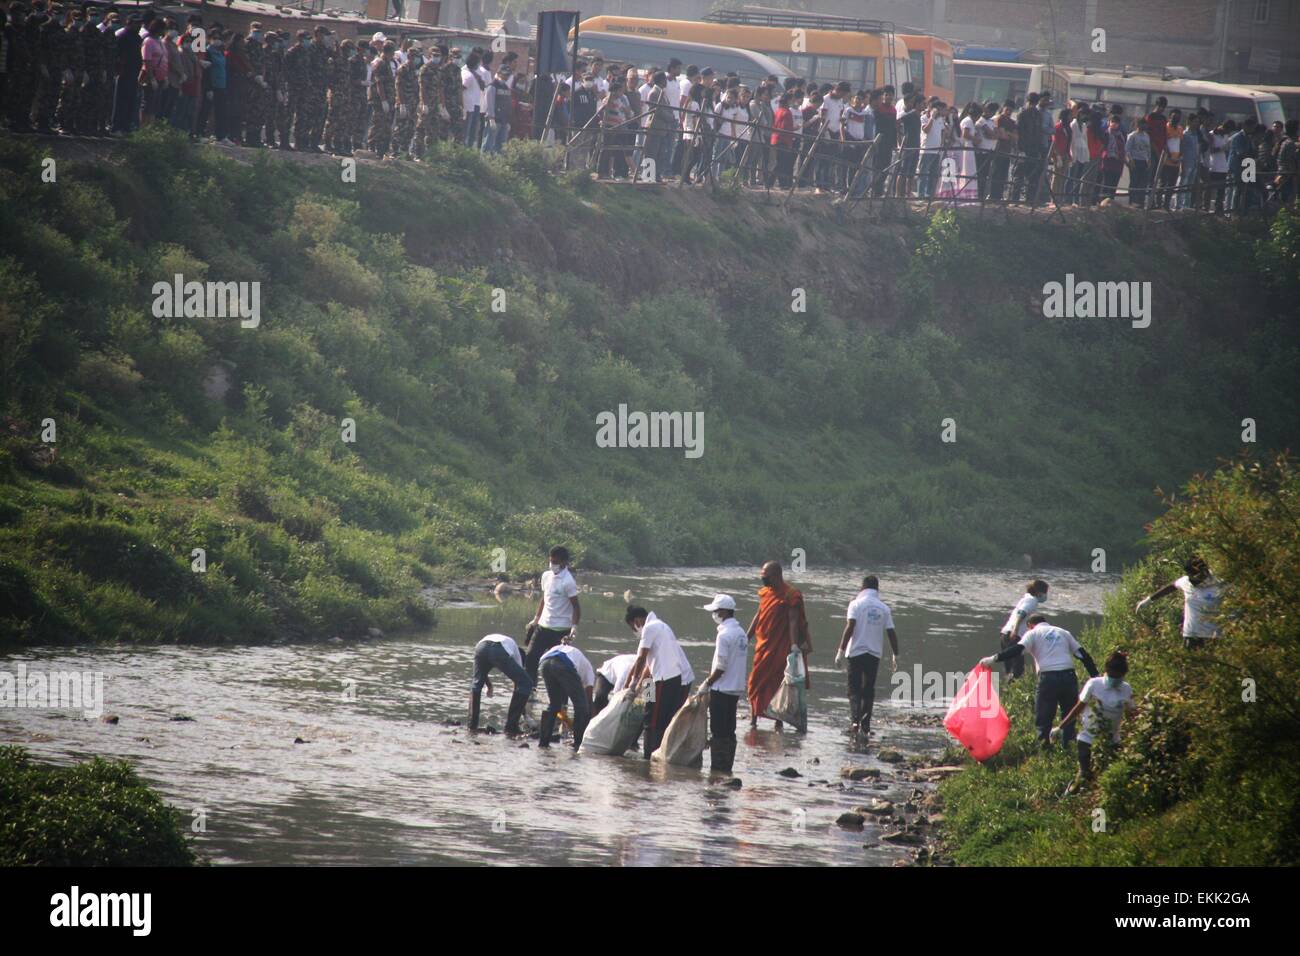 Kathmandu, Nepal. 11th Apr, 2015. Nepalese people pick up rubbish on the Bagmati river to mark the 100th week of the Bagmati Clean-up Campaign in Kathmandu, Nepal, April 11, 2015. A sea of people thronged the Bagmati river to form a human chain from Sundarijal to Chobar in order to convey a message that the holy river is no longer a dumping site. Credit:  Sunil Sharma/Xinhua/Alamy Live News Stock Photo